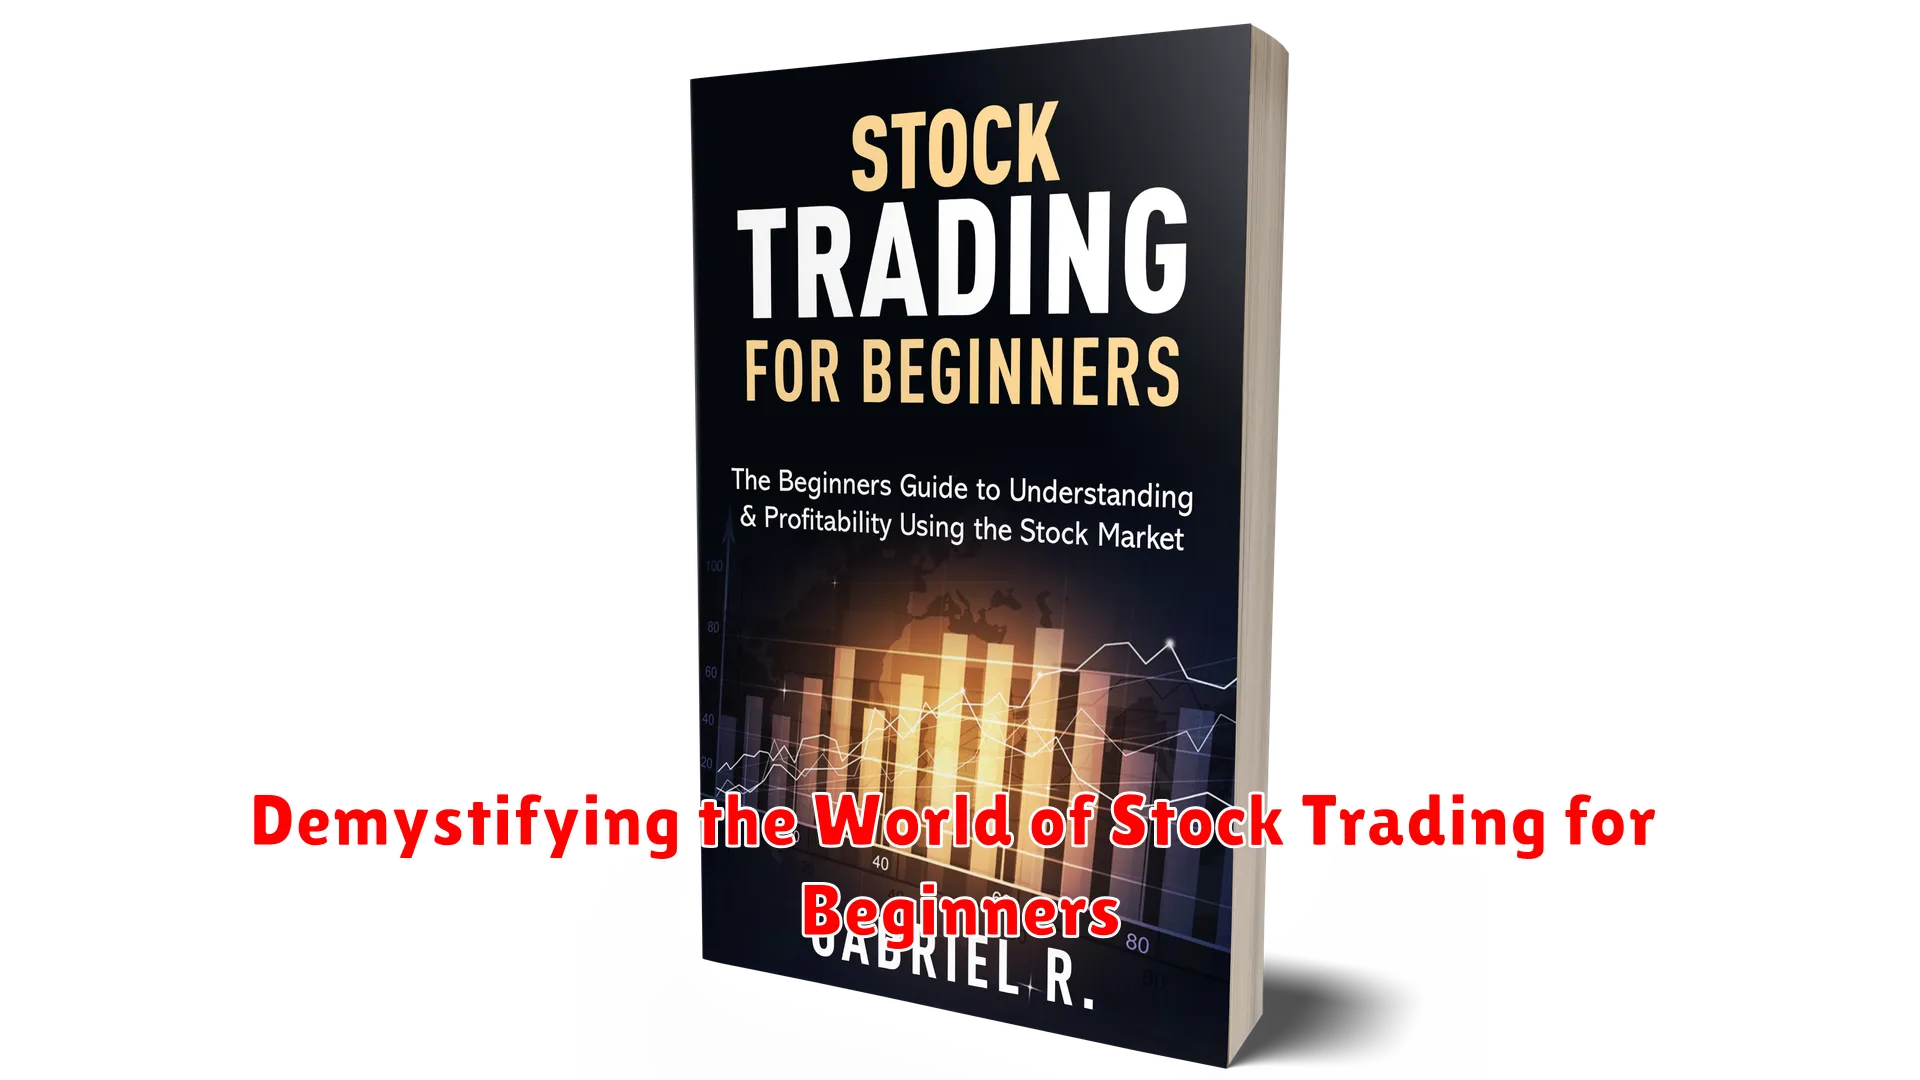 Demystifying the World of Stock Trading for Beginners